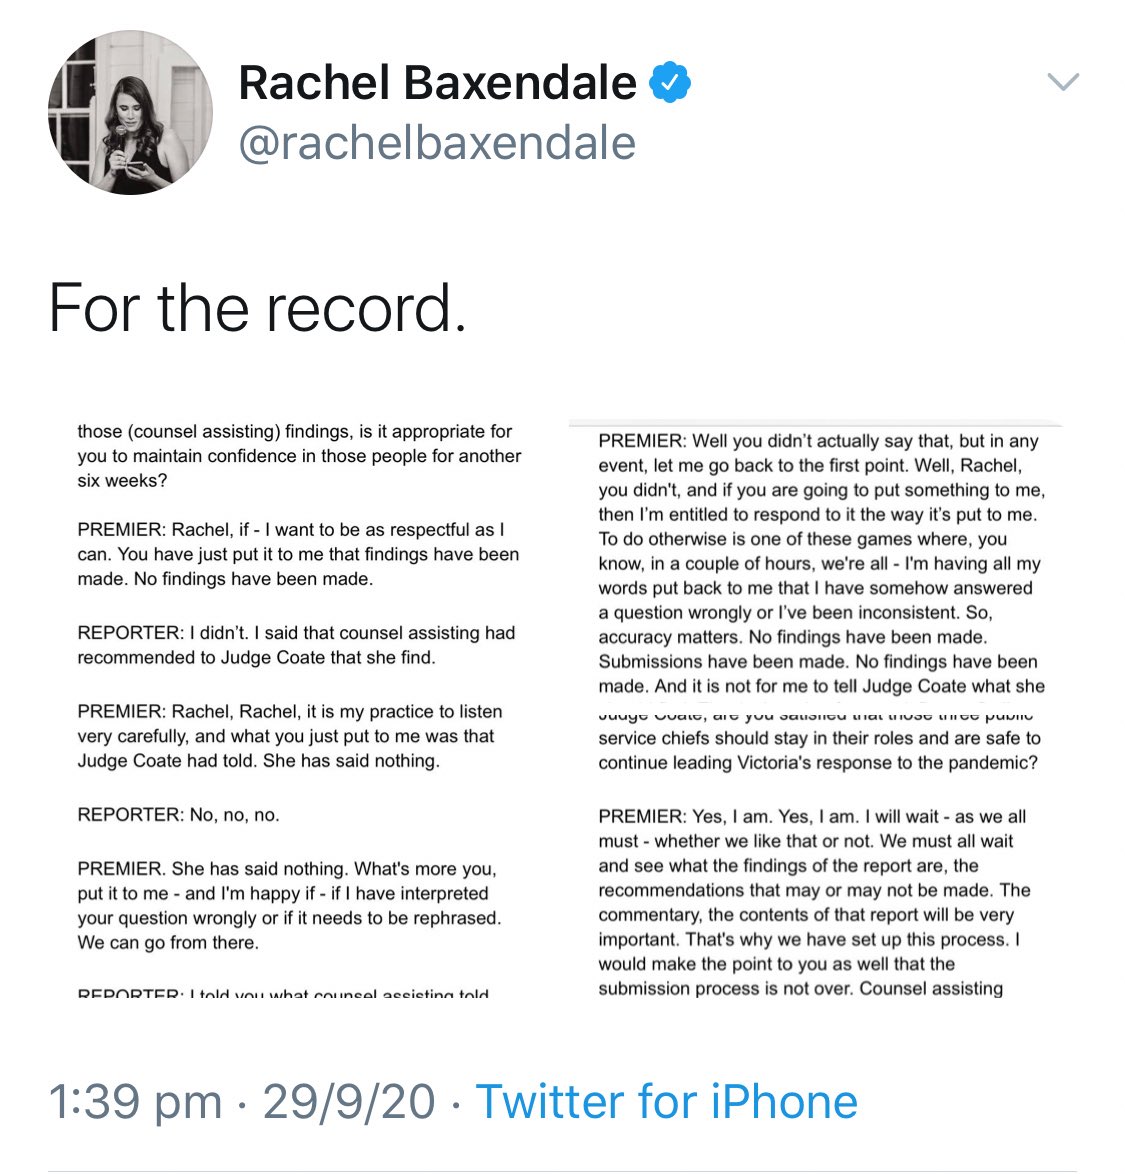 /3 Then Baxendale abandoned truth & tweeted this “transcript”:“Judge Coate’s already BEEN told (by) counsel assisting that she should find that ...blah… given those (Counsel Assisting) findings ...”Bracketed words were never said, nor was the “been’’; Changing the meaning.